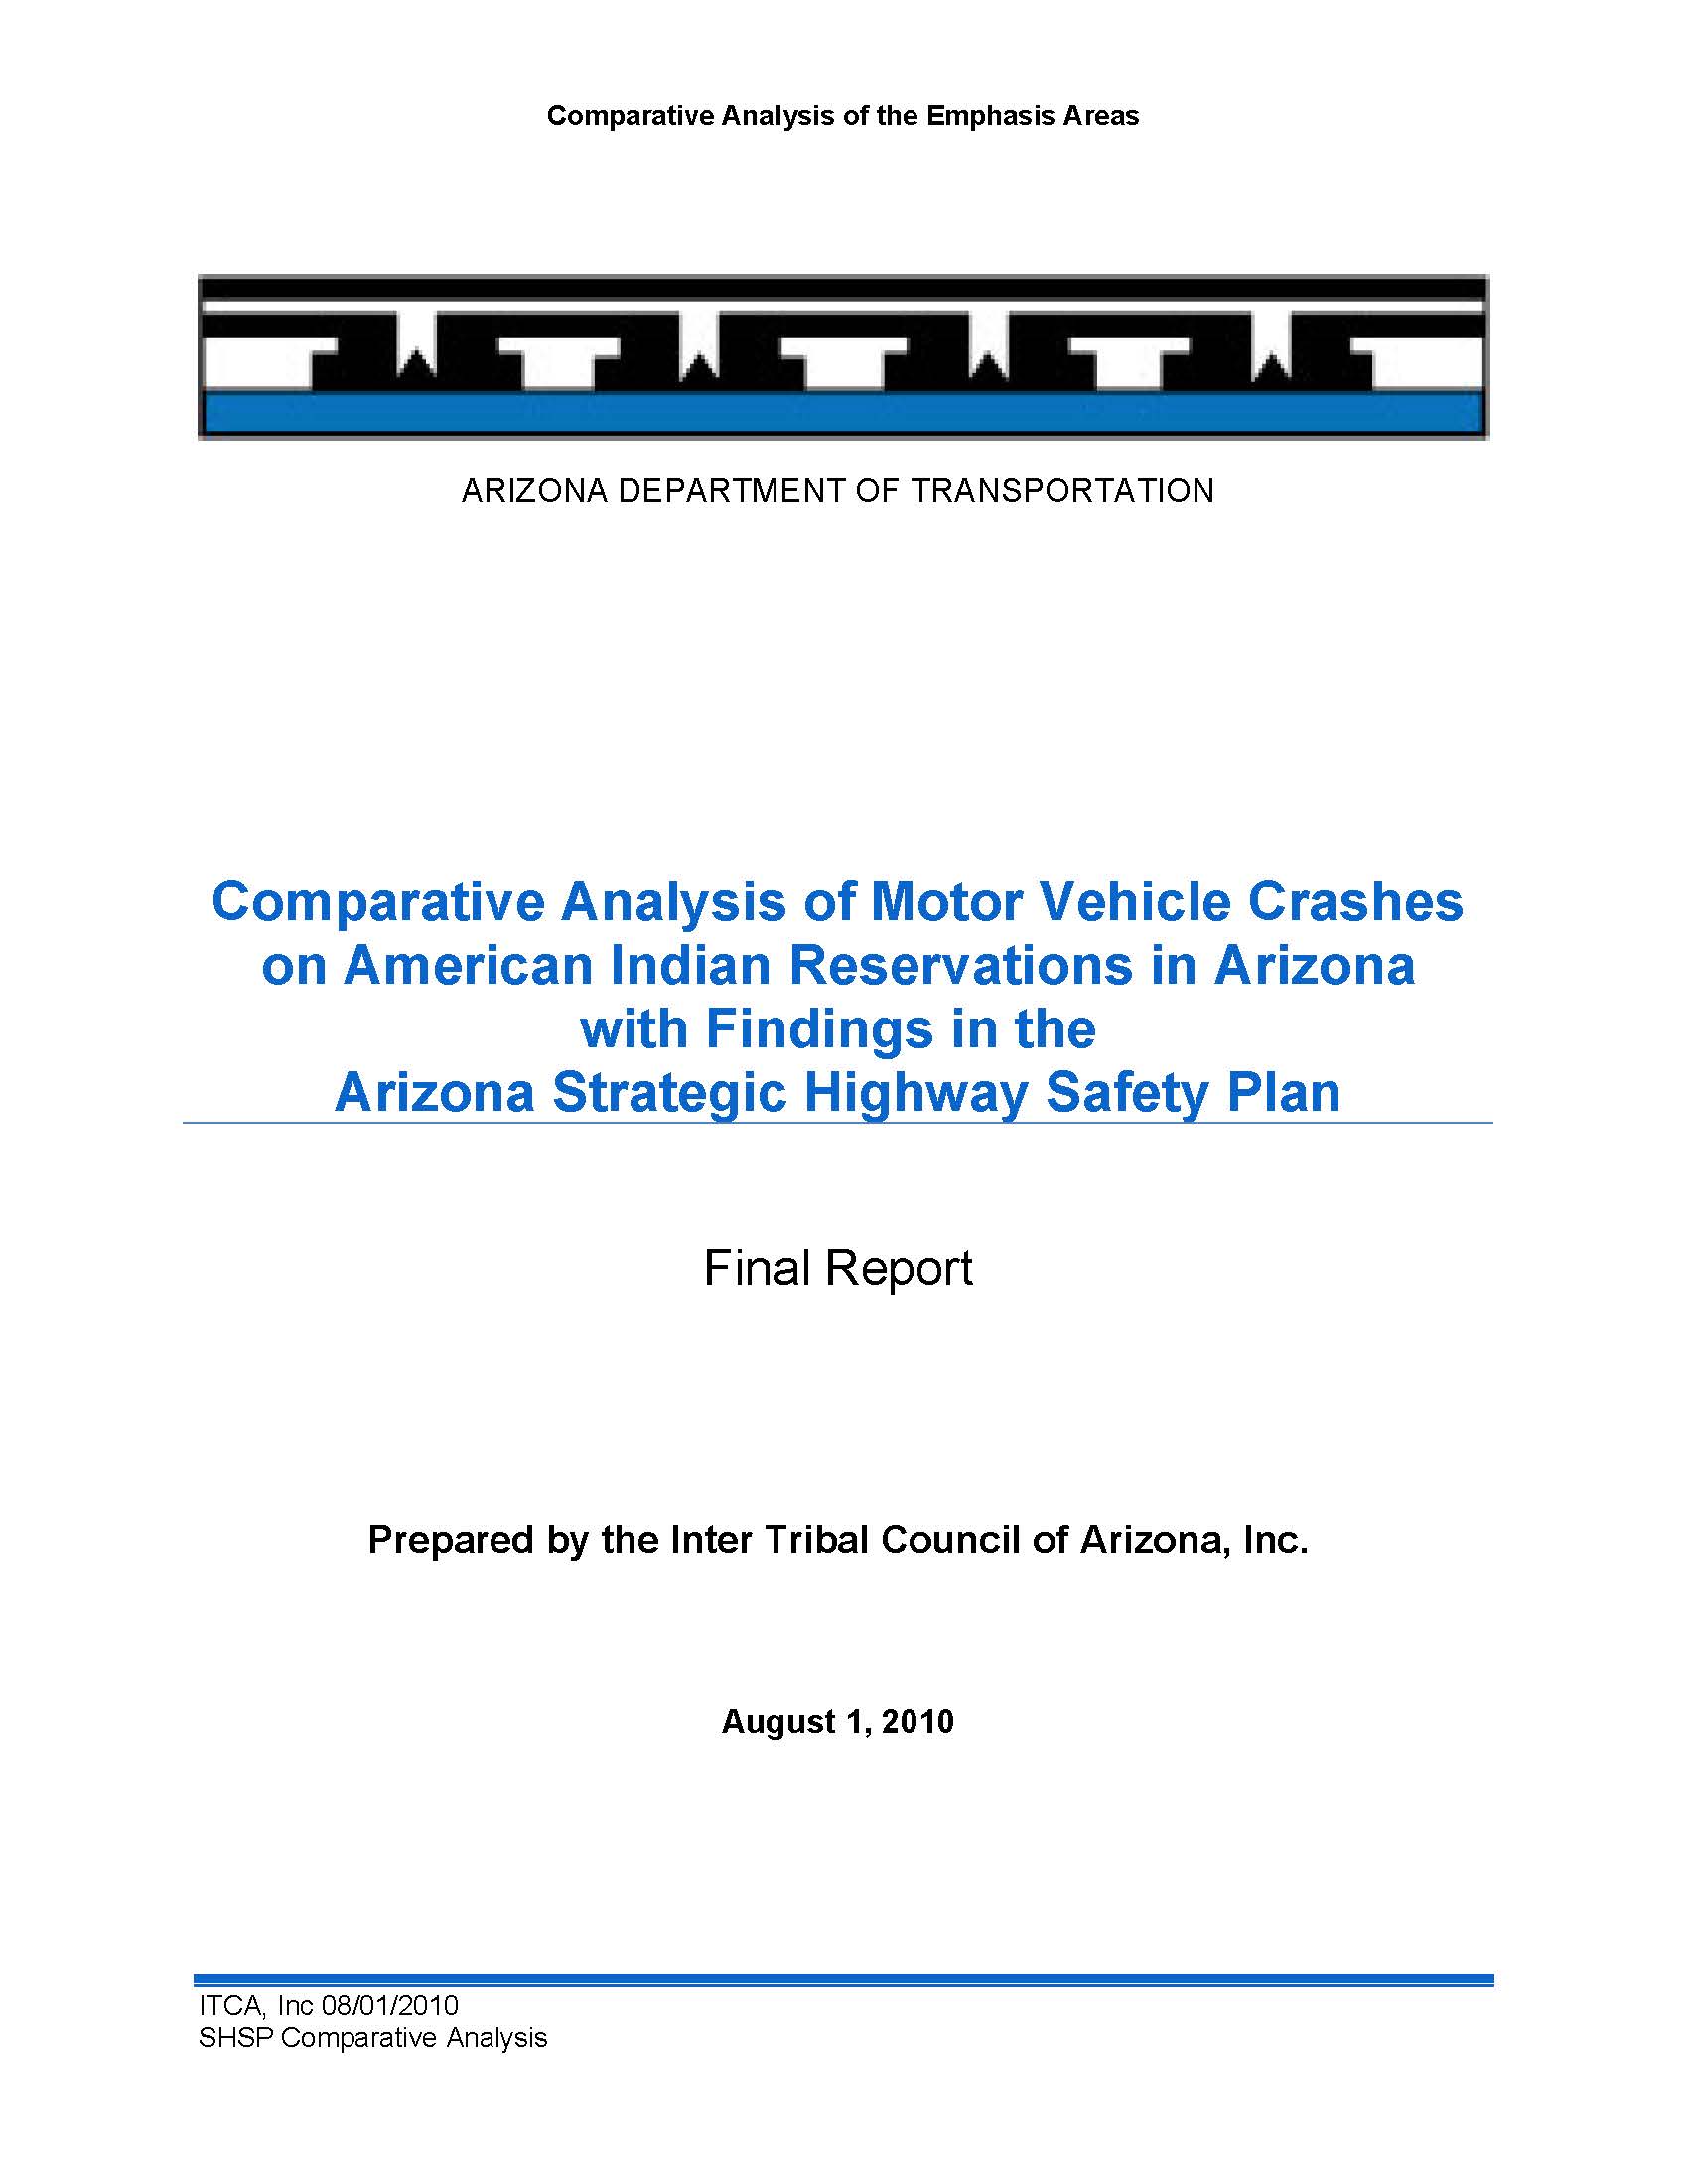 Comparative Analysis of Motor Vehicle Crashes on American Indian Reservations in Arizona with Findings in the Arizona Strategic Highway Safety Plan